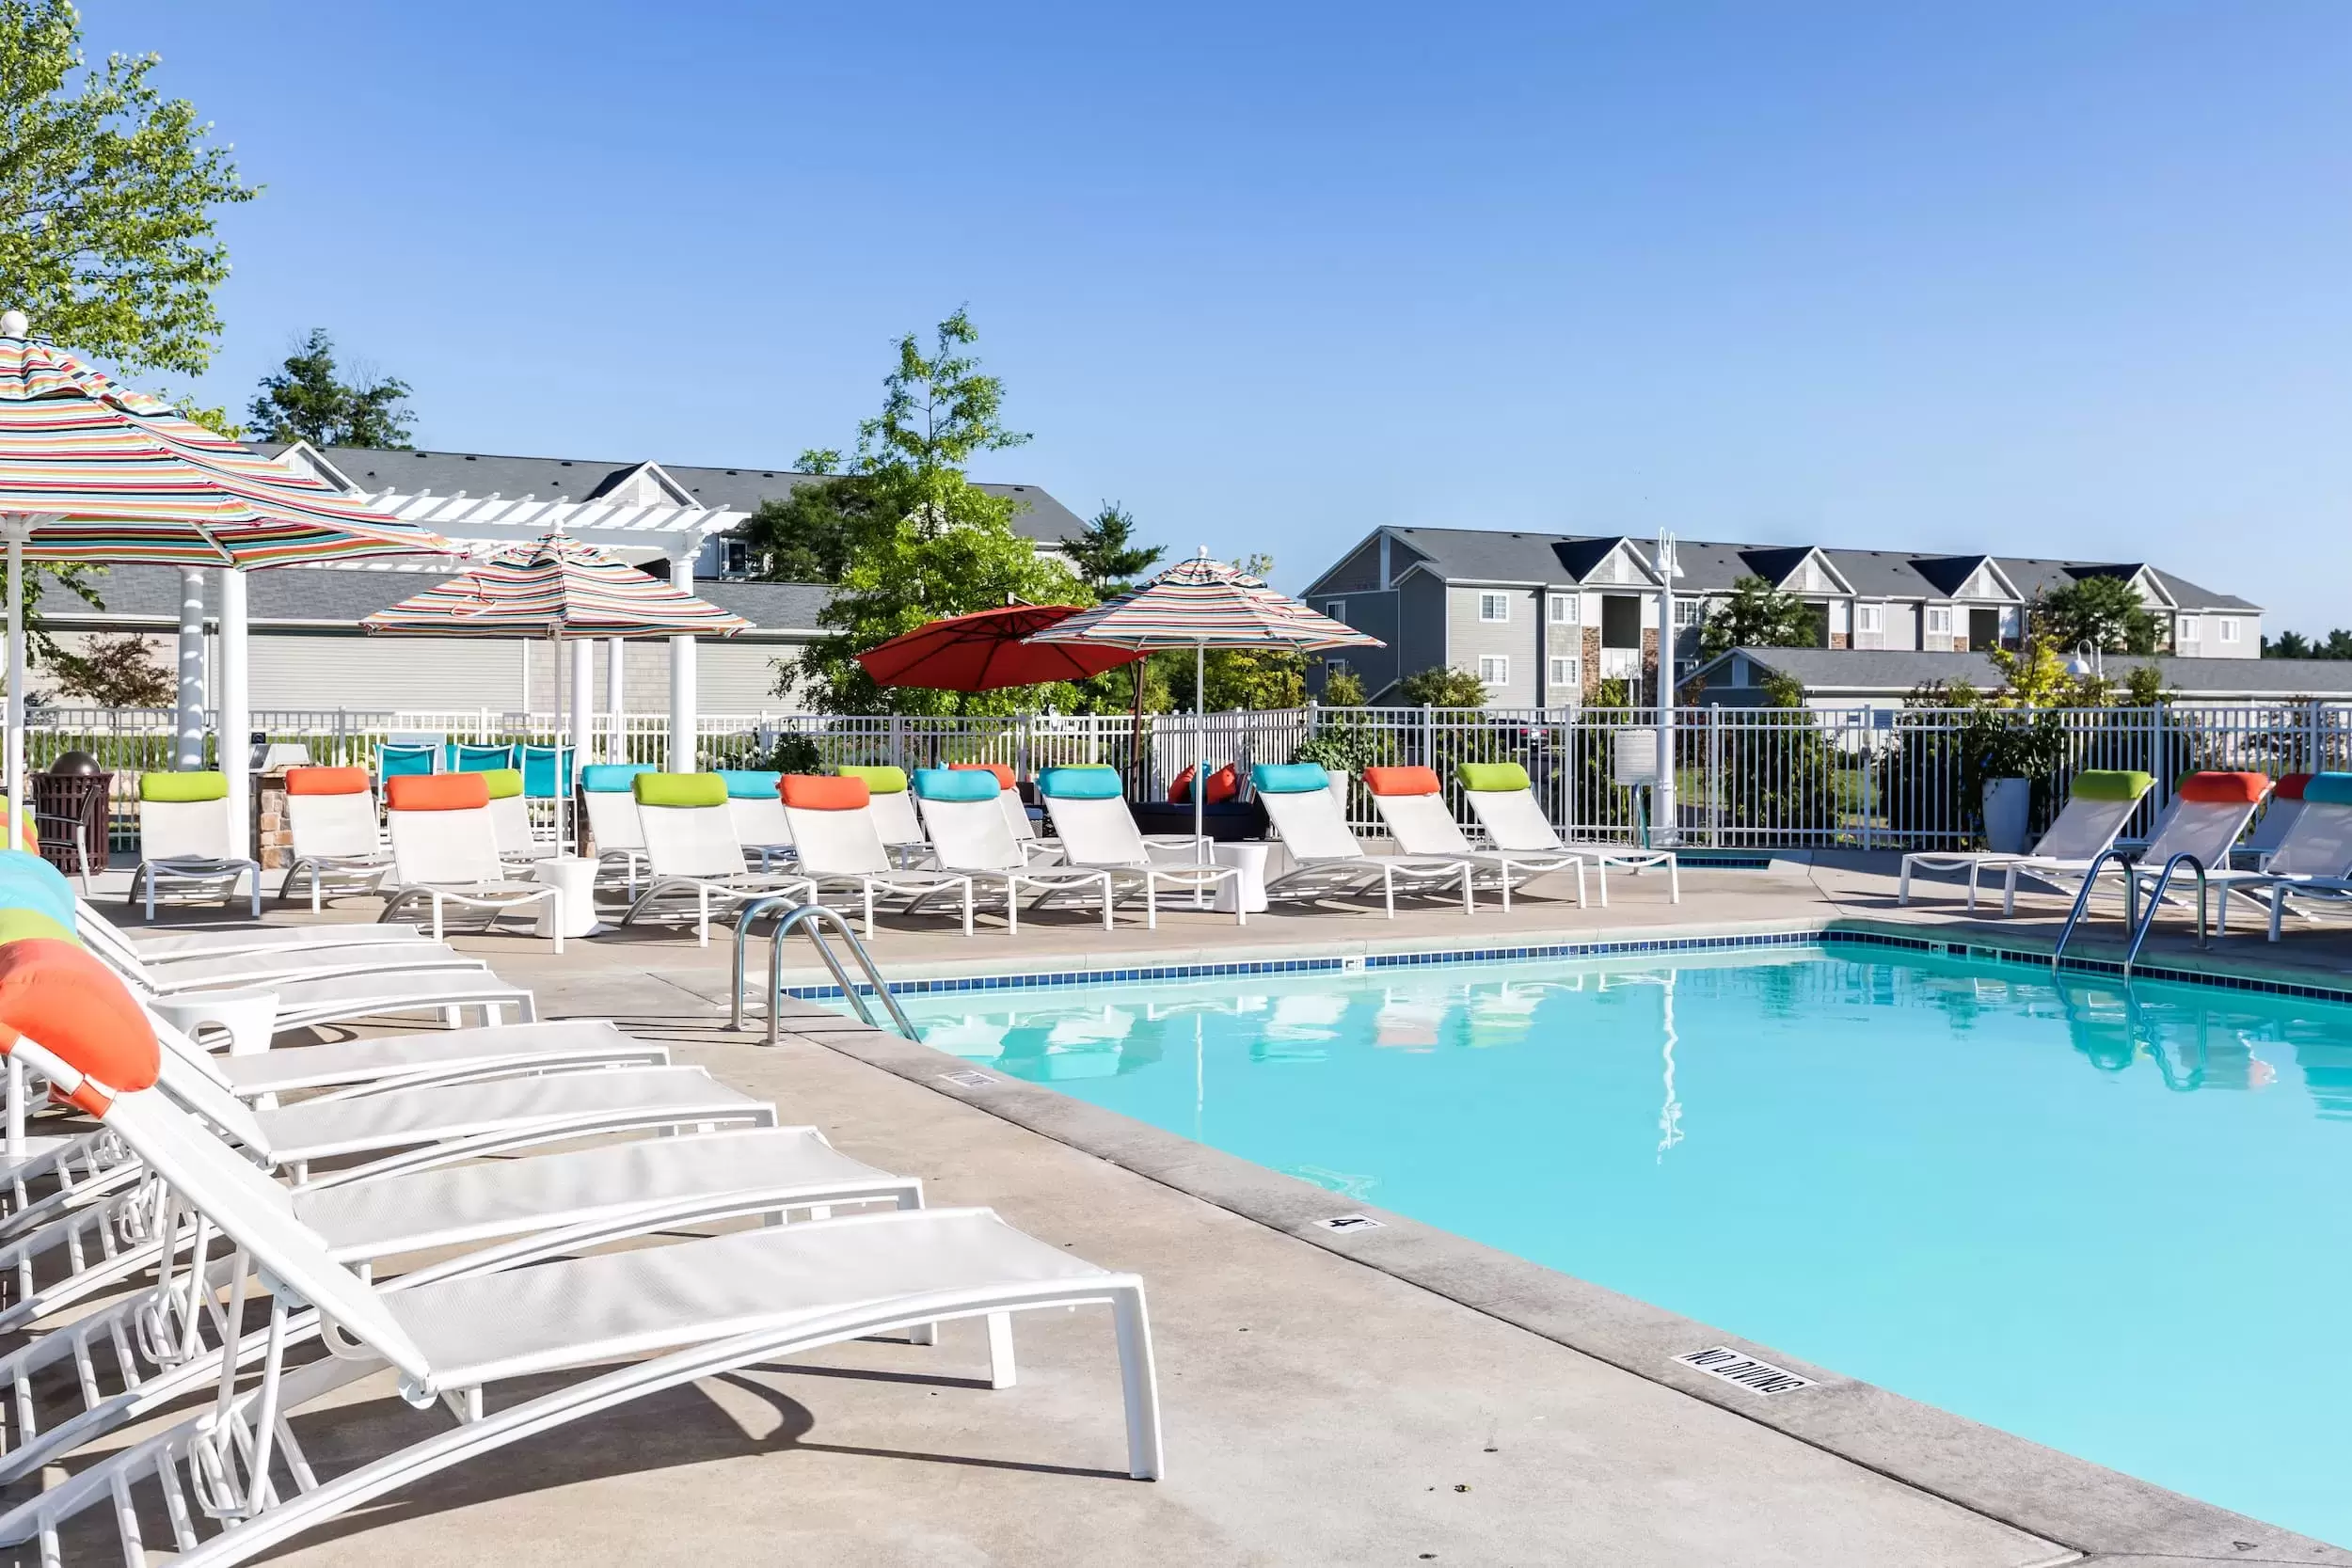 Lounge chairs surround the pool at Liv Arbors Apartments.